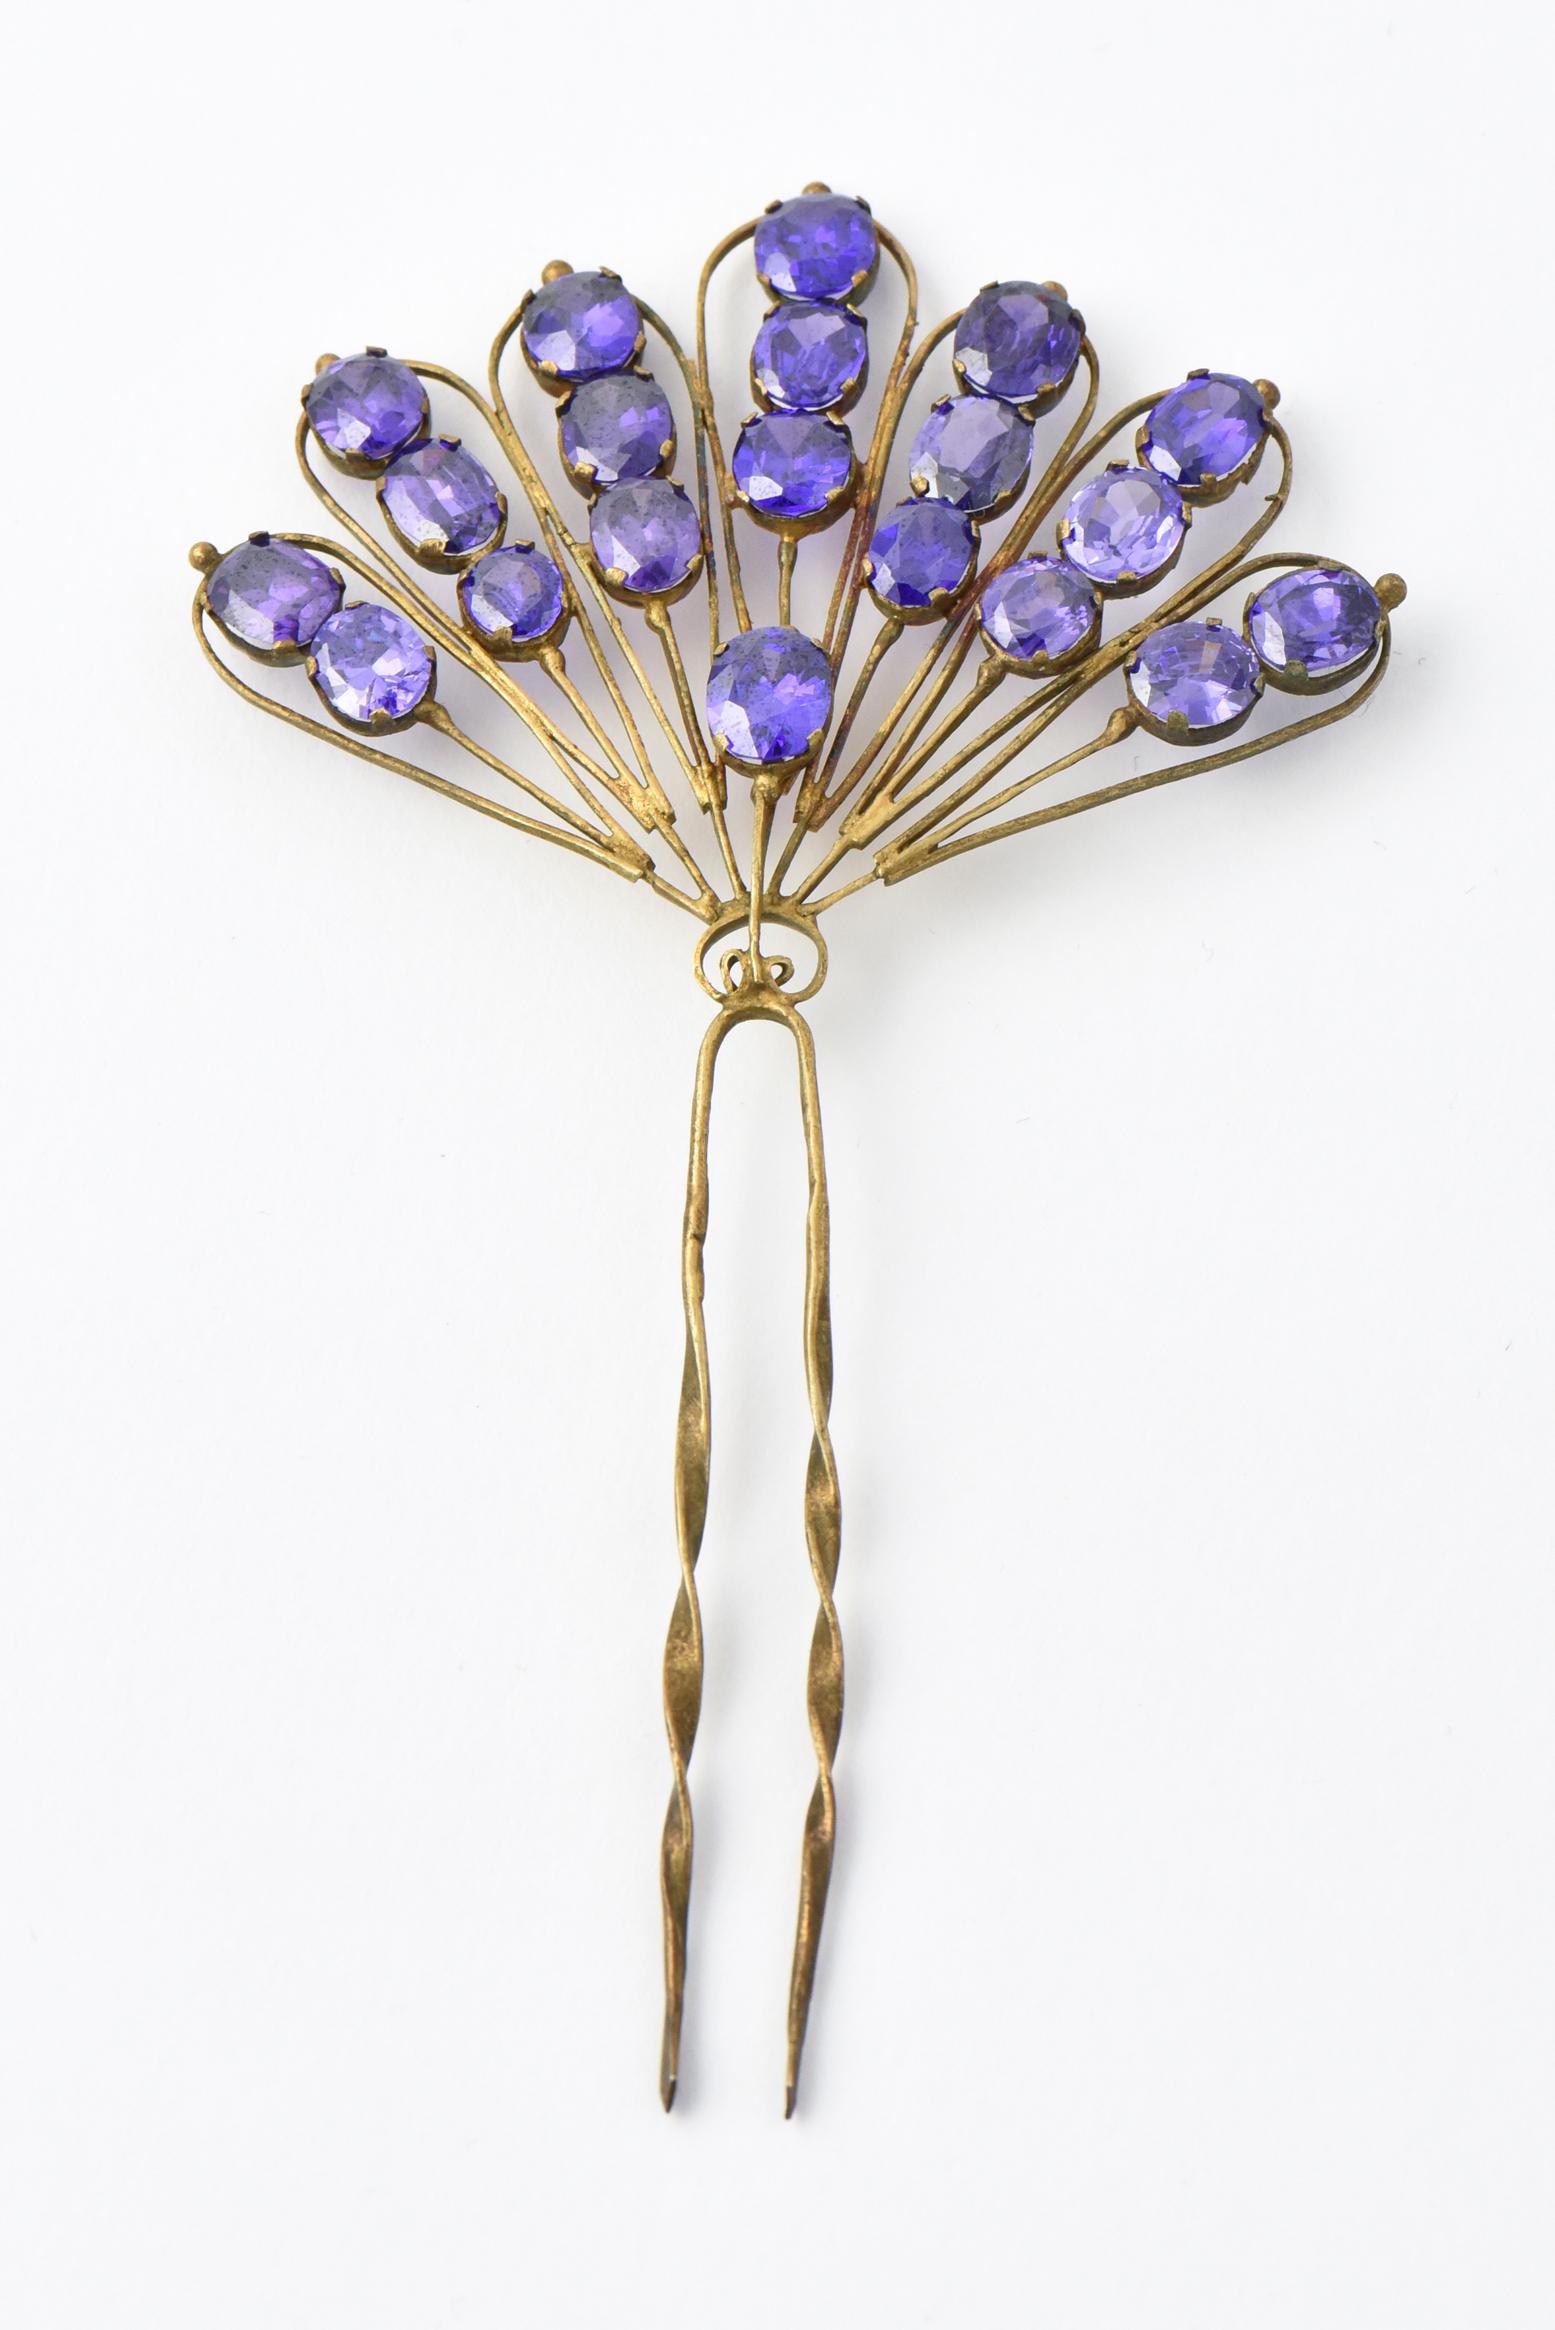 Victorian Faux Amethyst Gilt Hair Comb For Sale 2